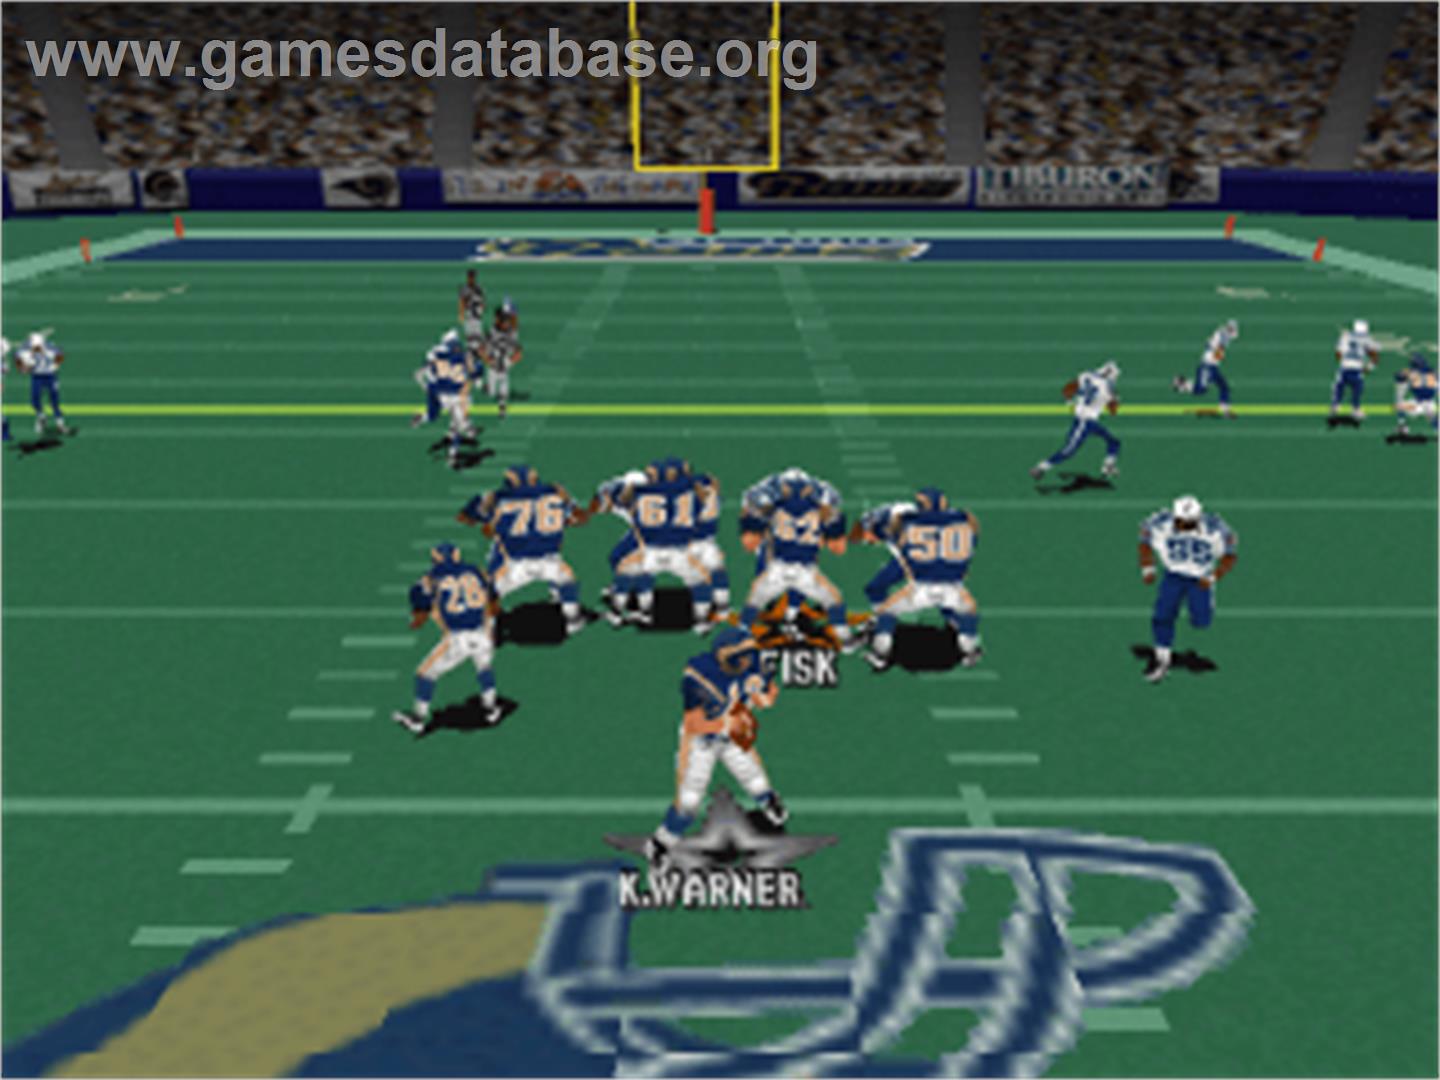 Madden NFL 2001 - Sony Playstation - Artwork - In Game